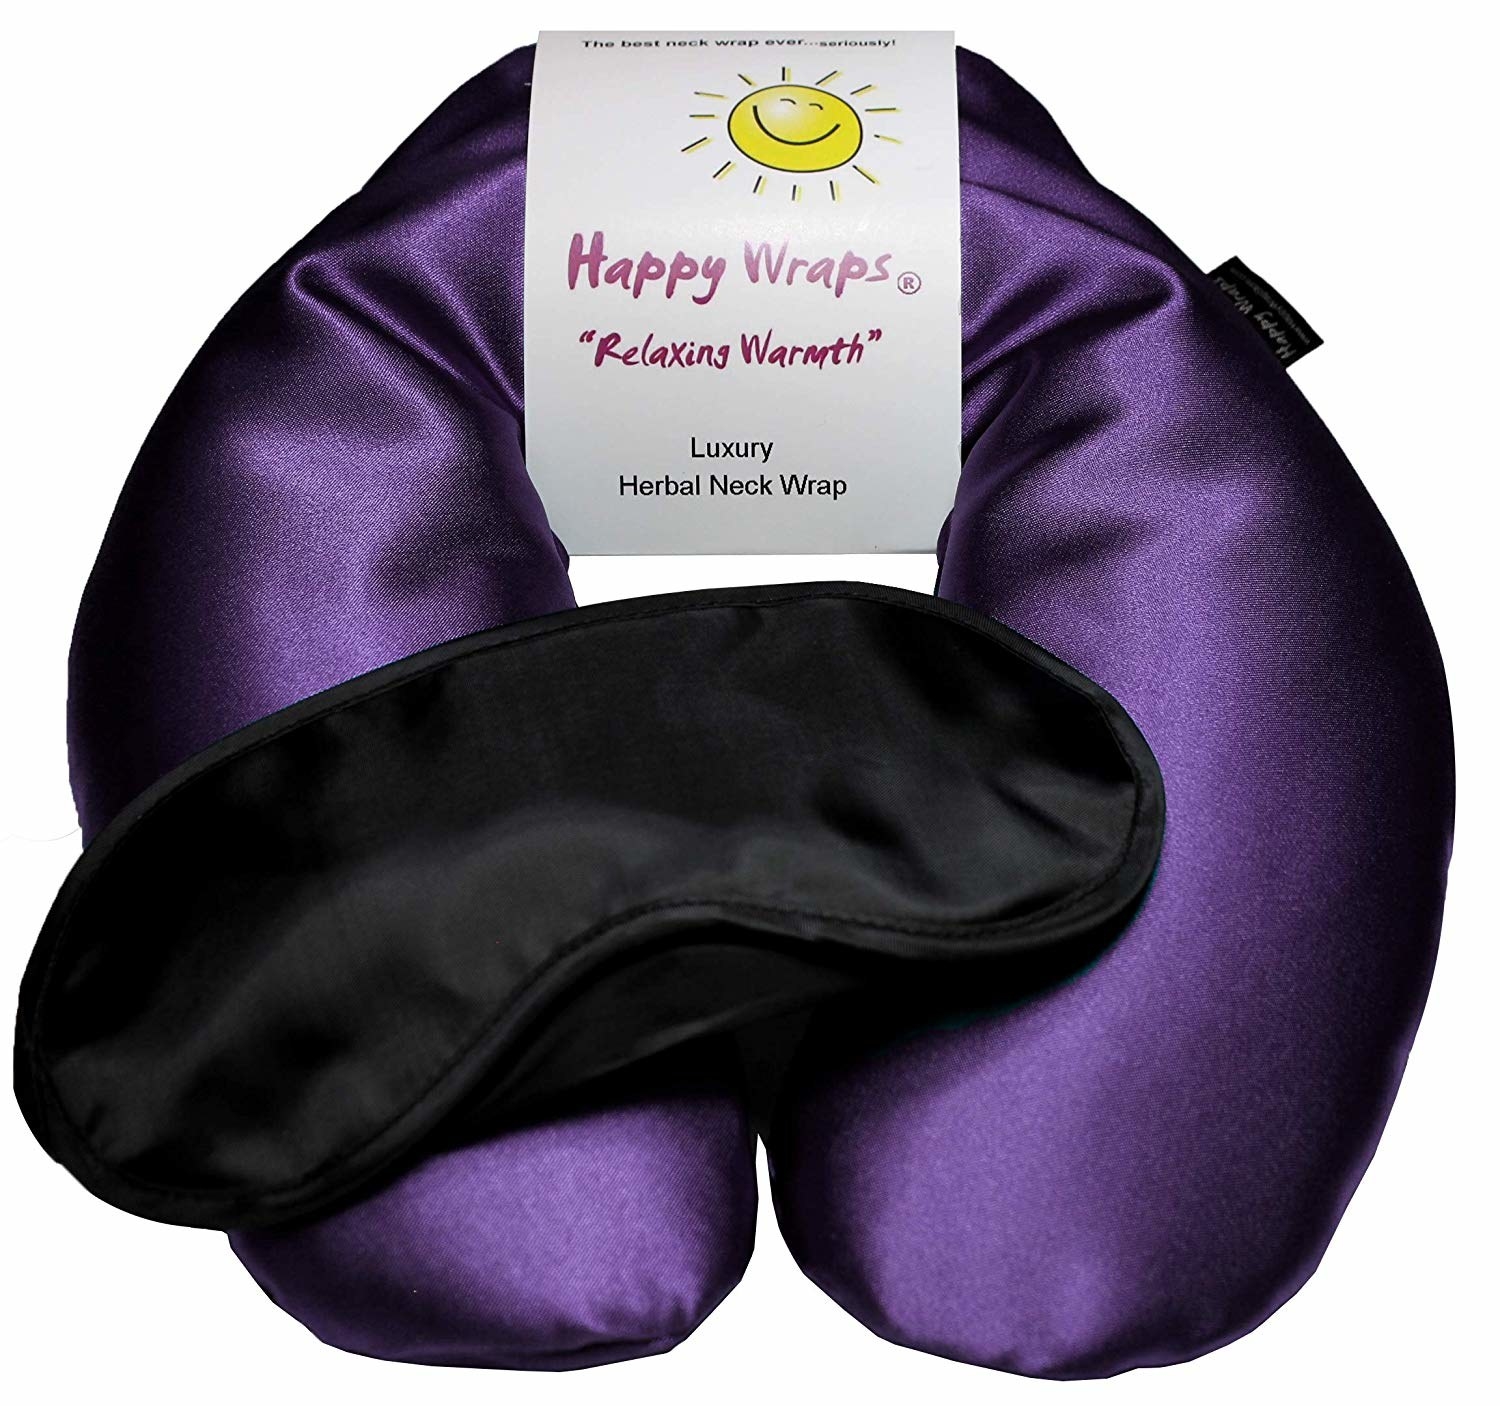 The purple sateen neck wrap and black polyester sleep mask